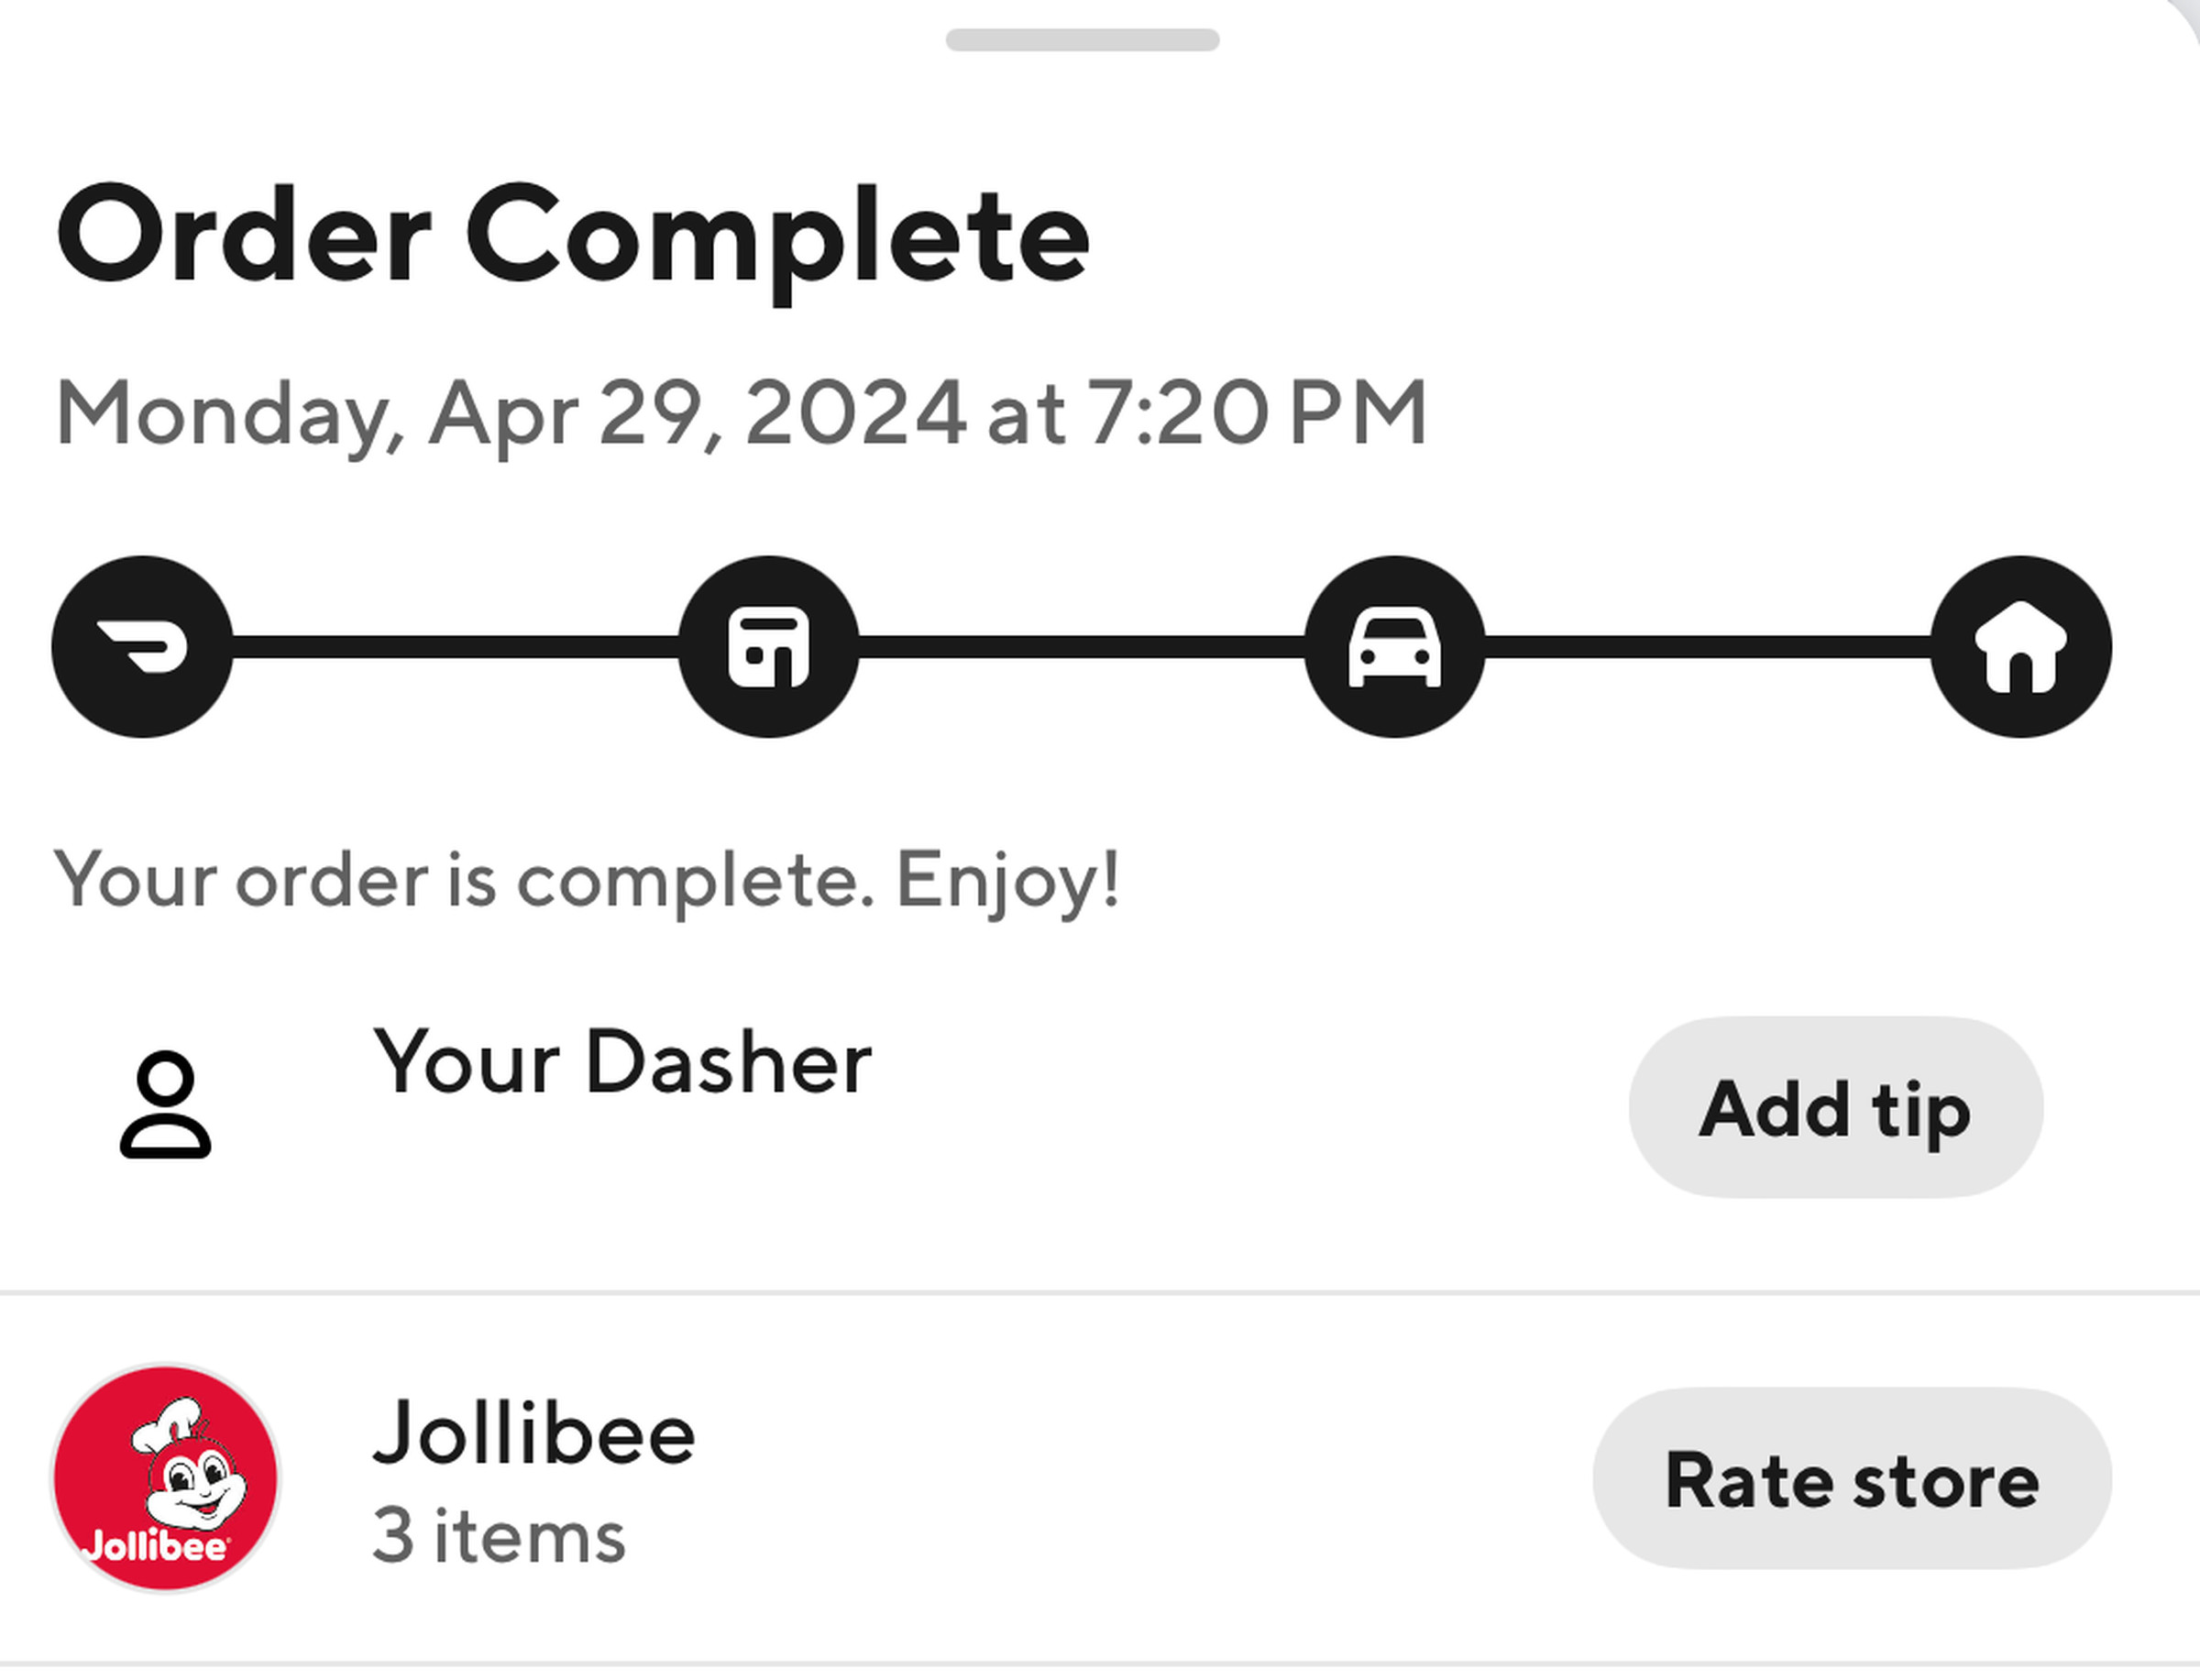 DoorDash tipping option in app visible clearly at the top